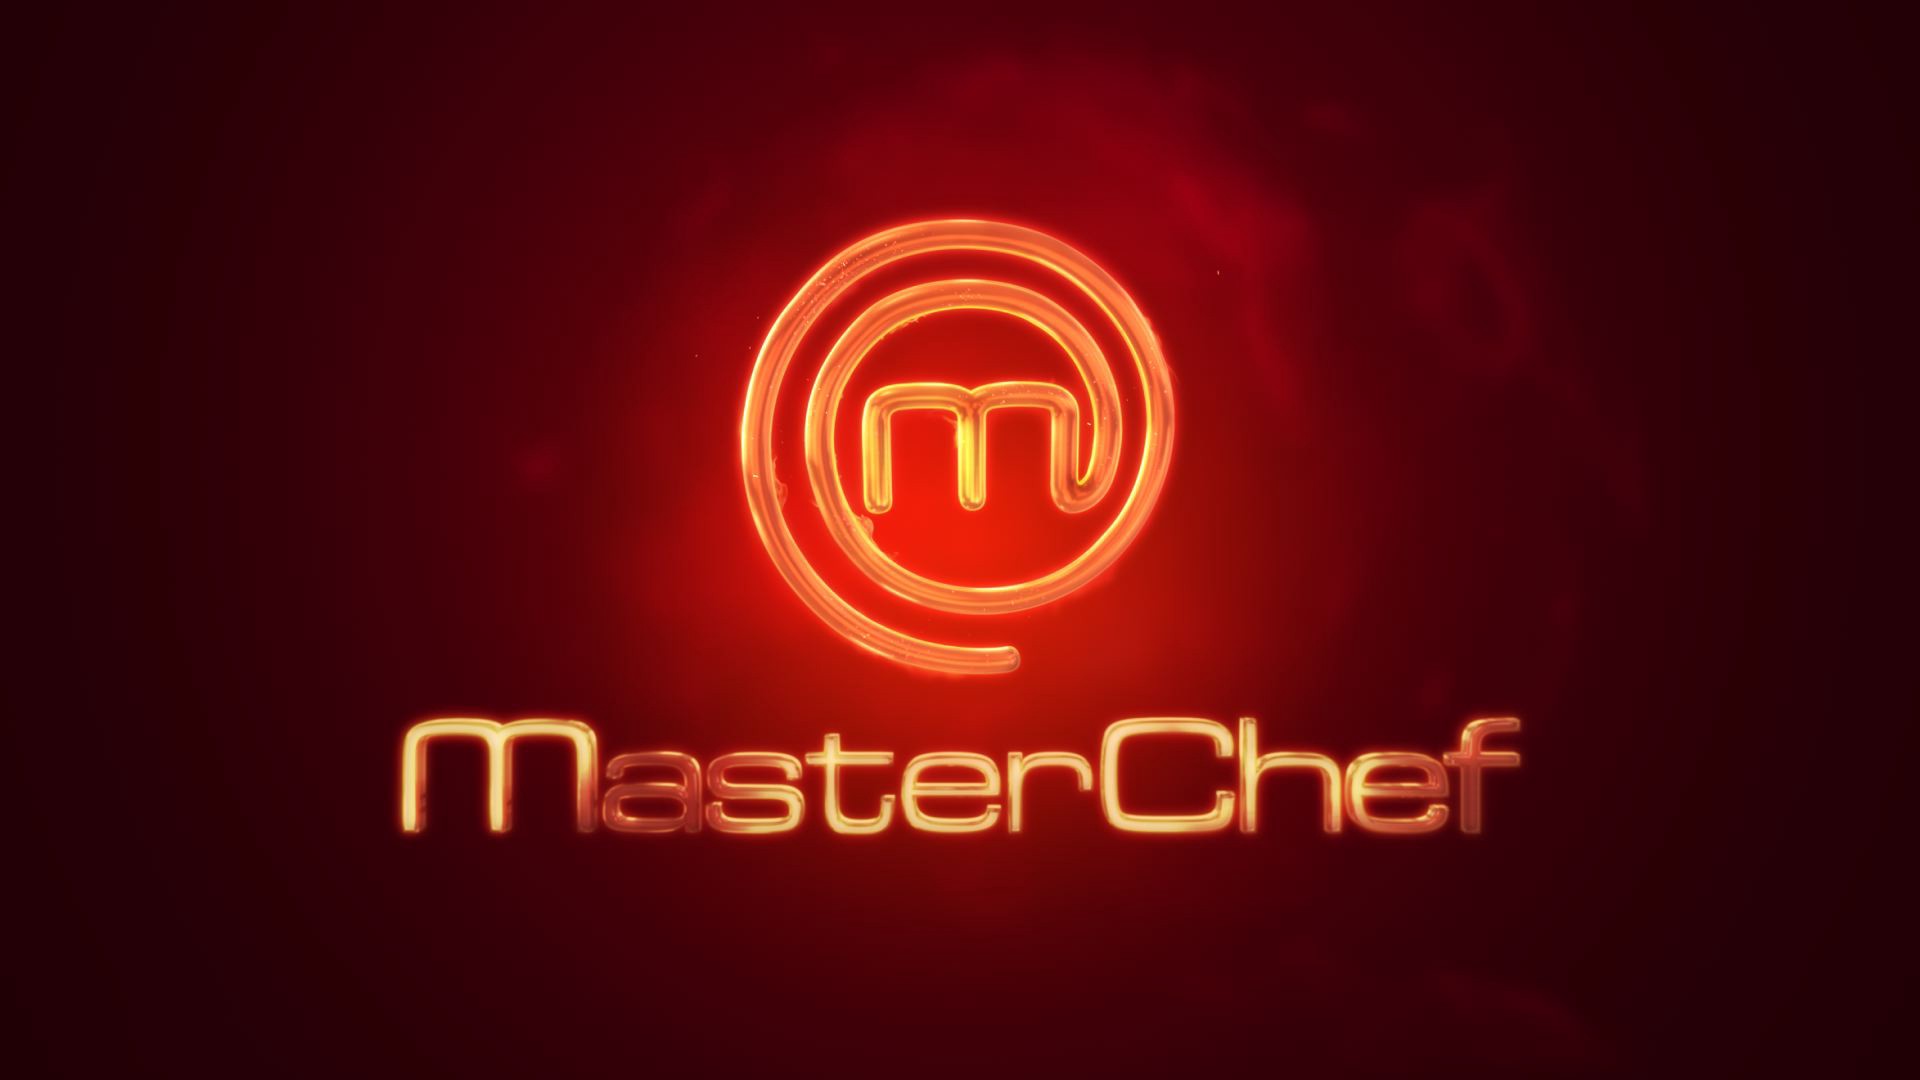 Developing software is like participating in MasterChef